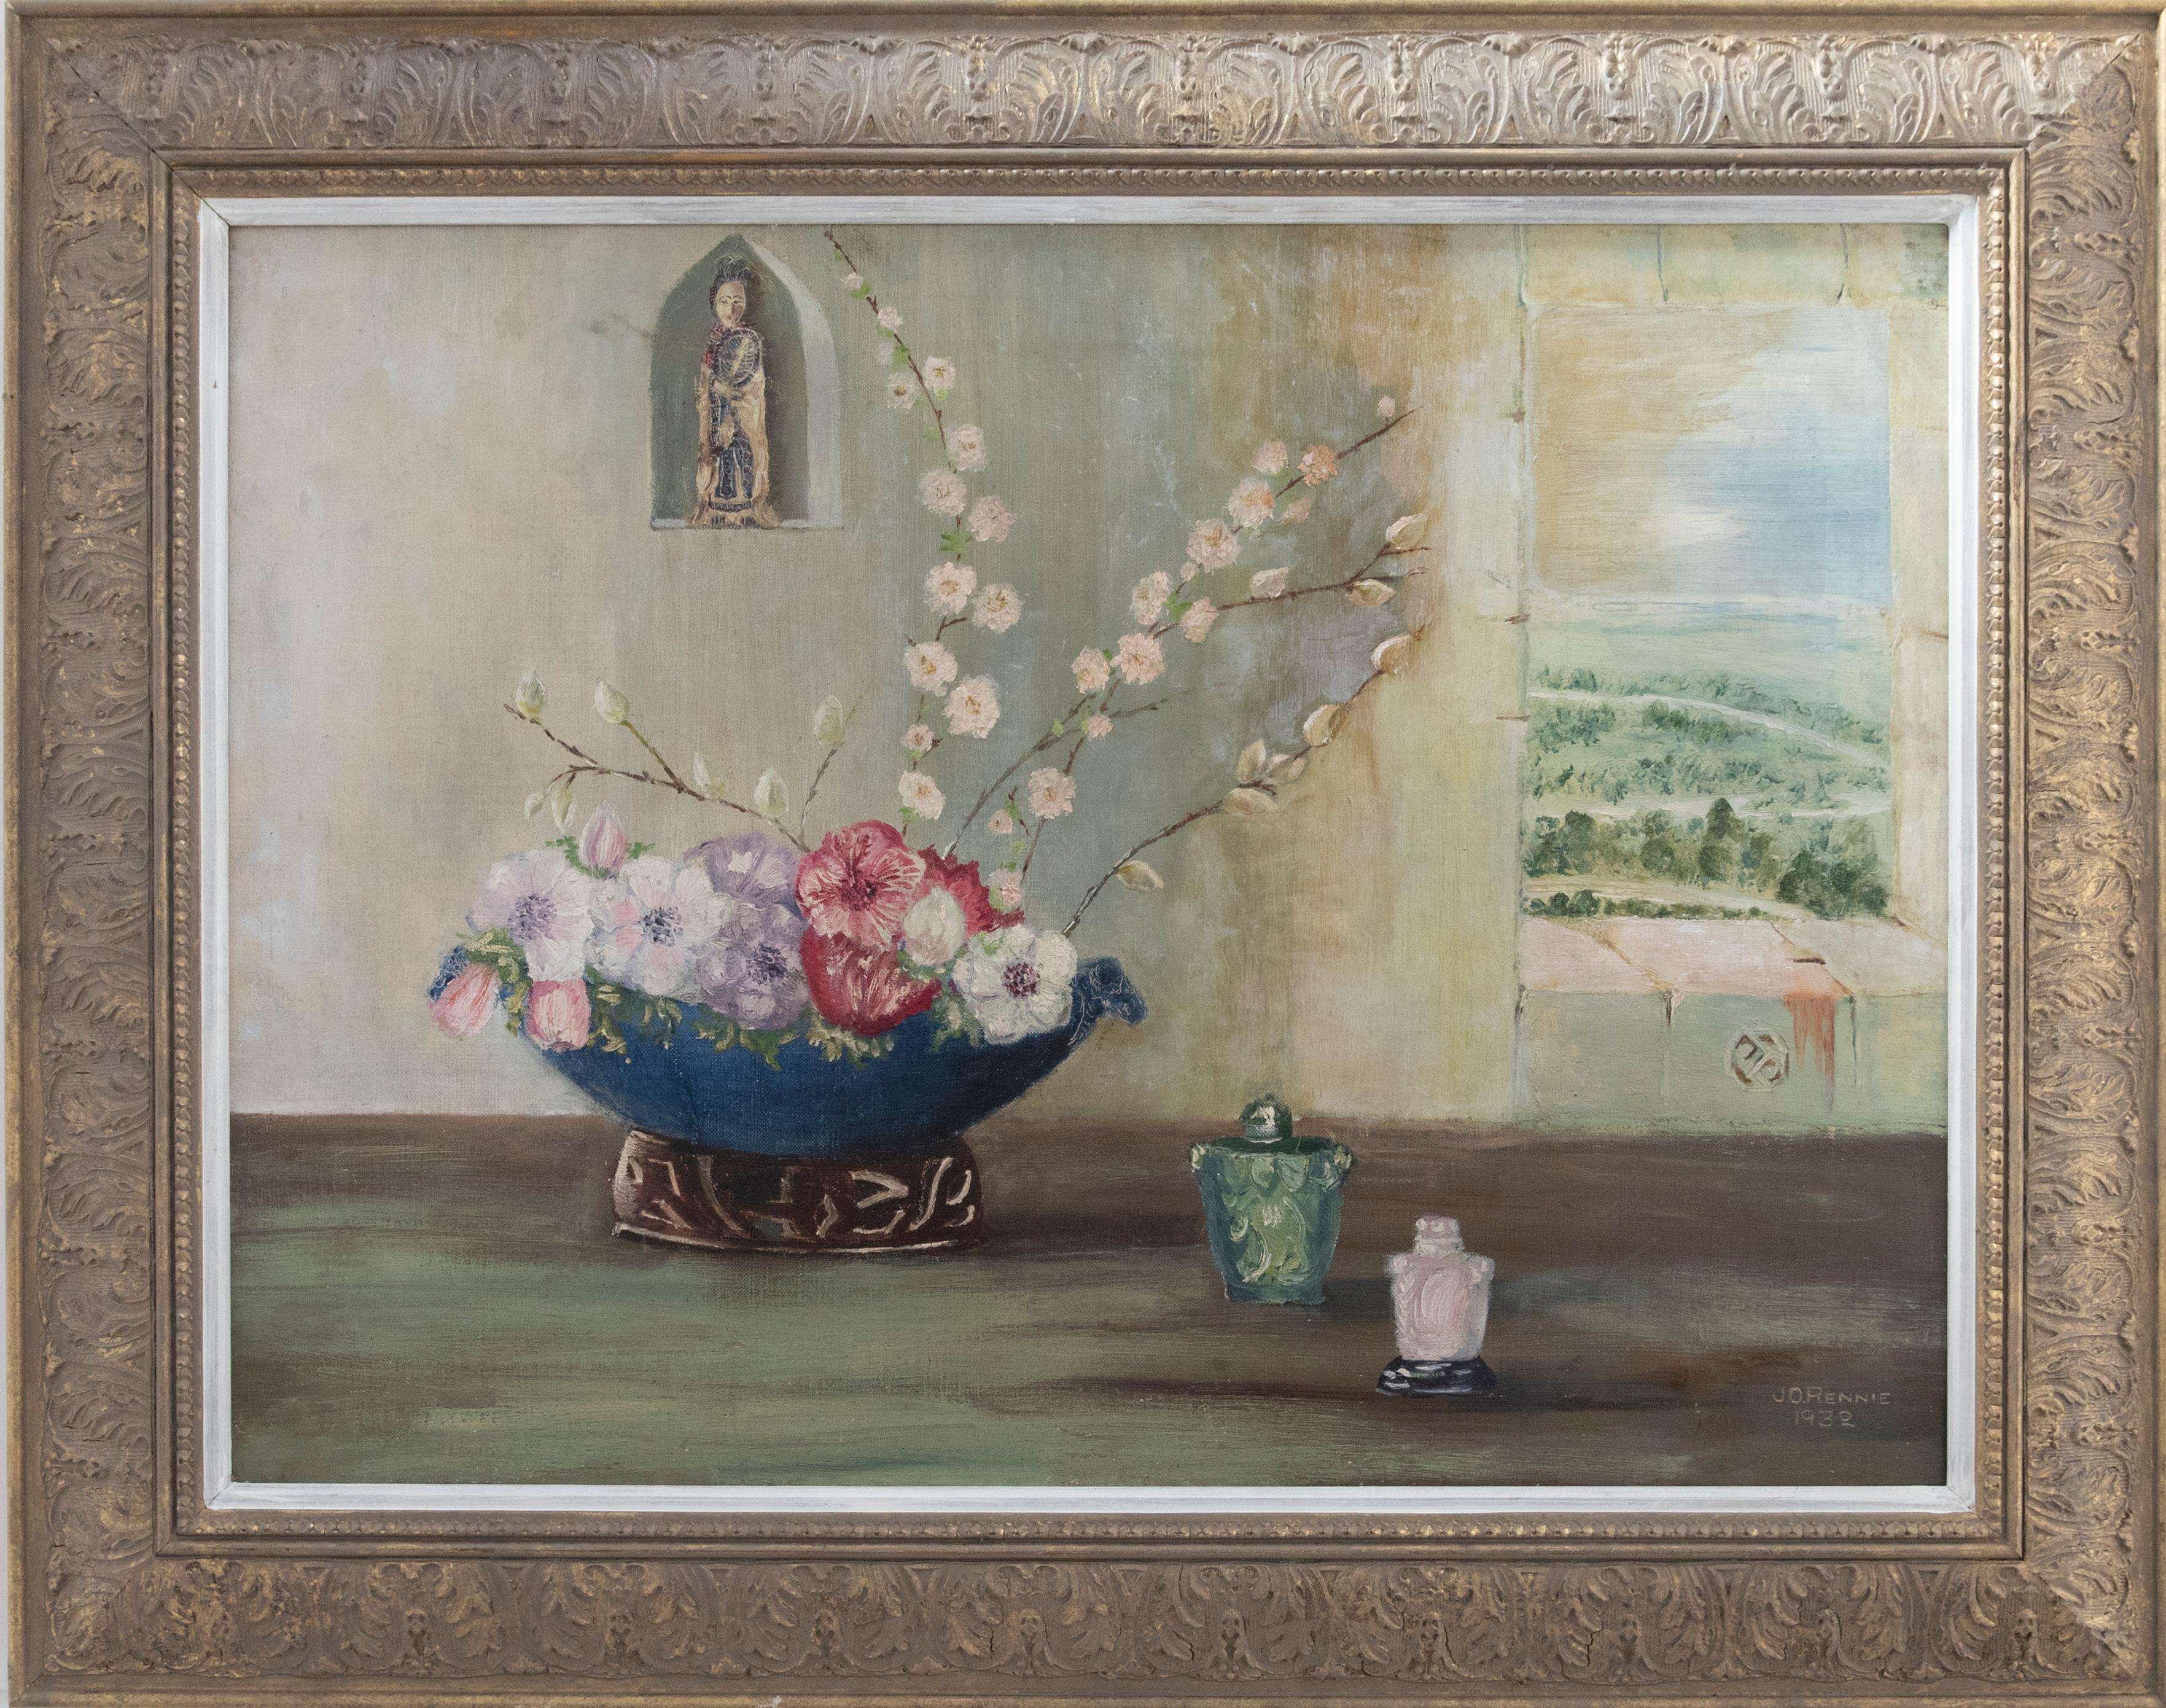 An oriental still life of blossom and flowers, arranged in a decorative vase with carved wood stand. To the right of the arrangement are two crystal vases in the colours pink and green. A geisha statue sits snug in a niche, next to a window with